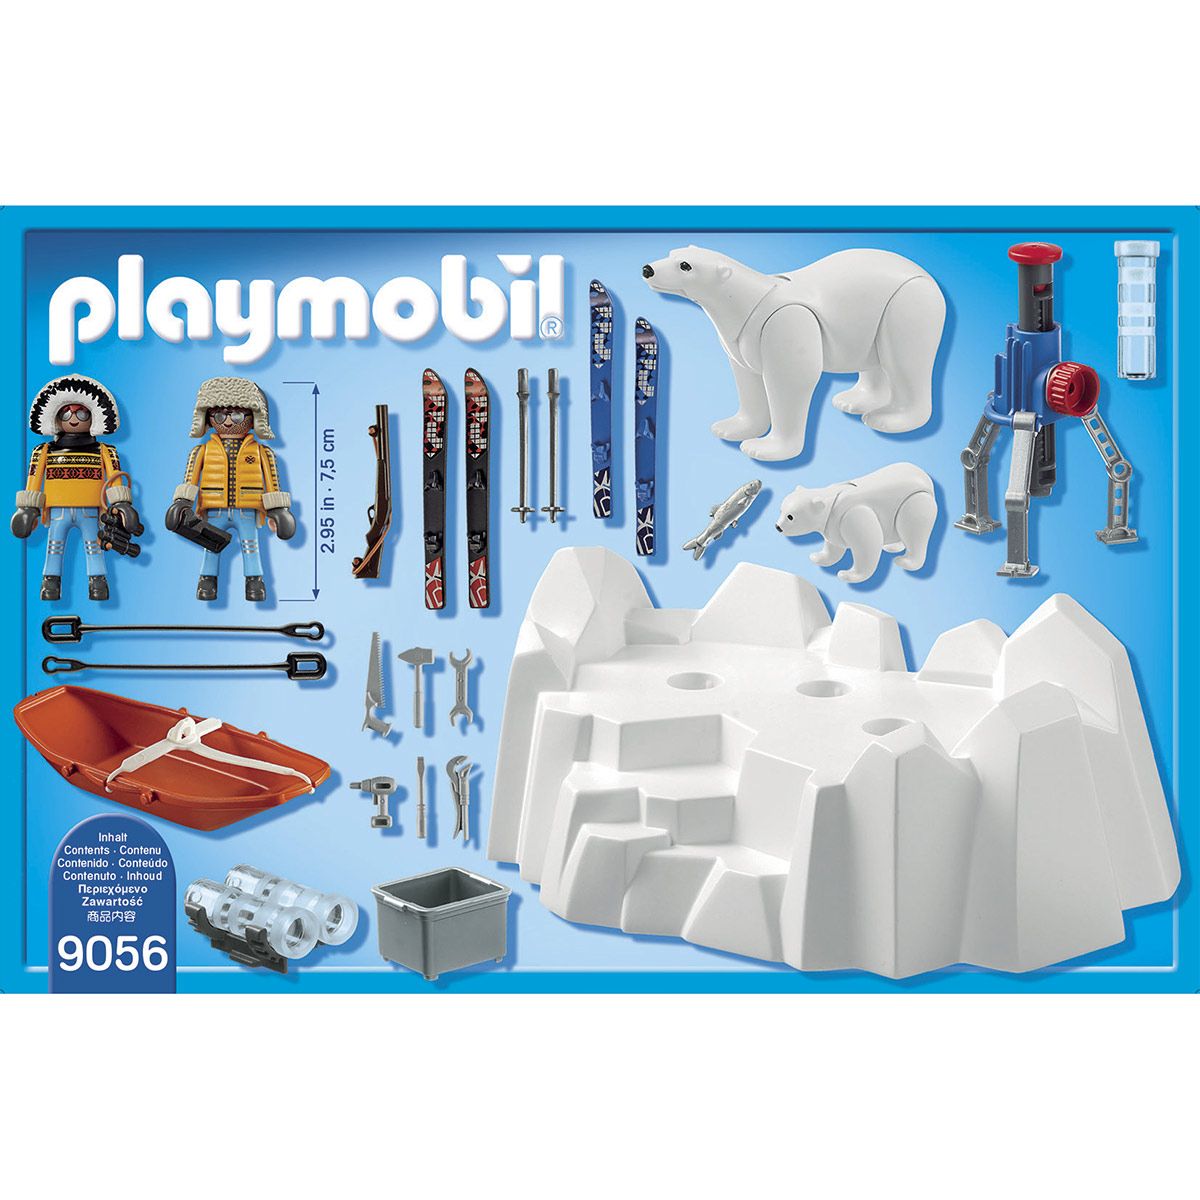 playmobil ours polaire